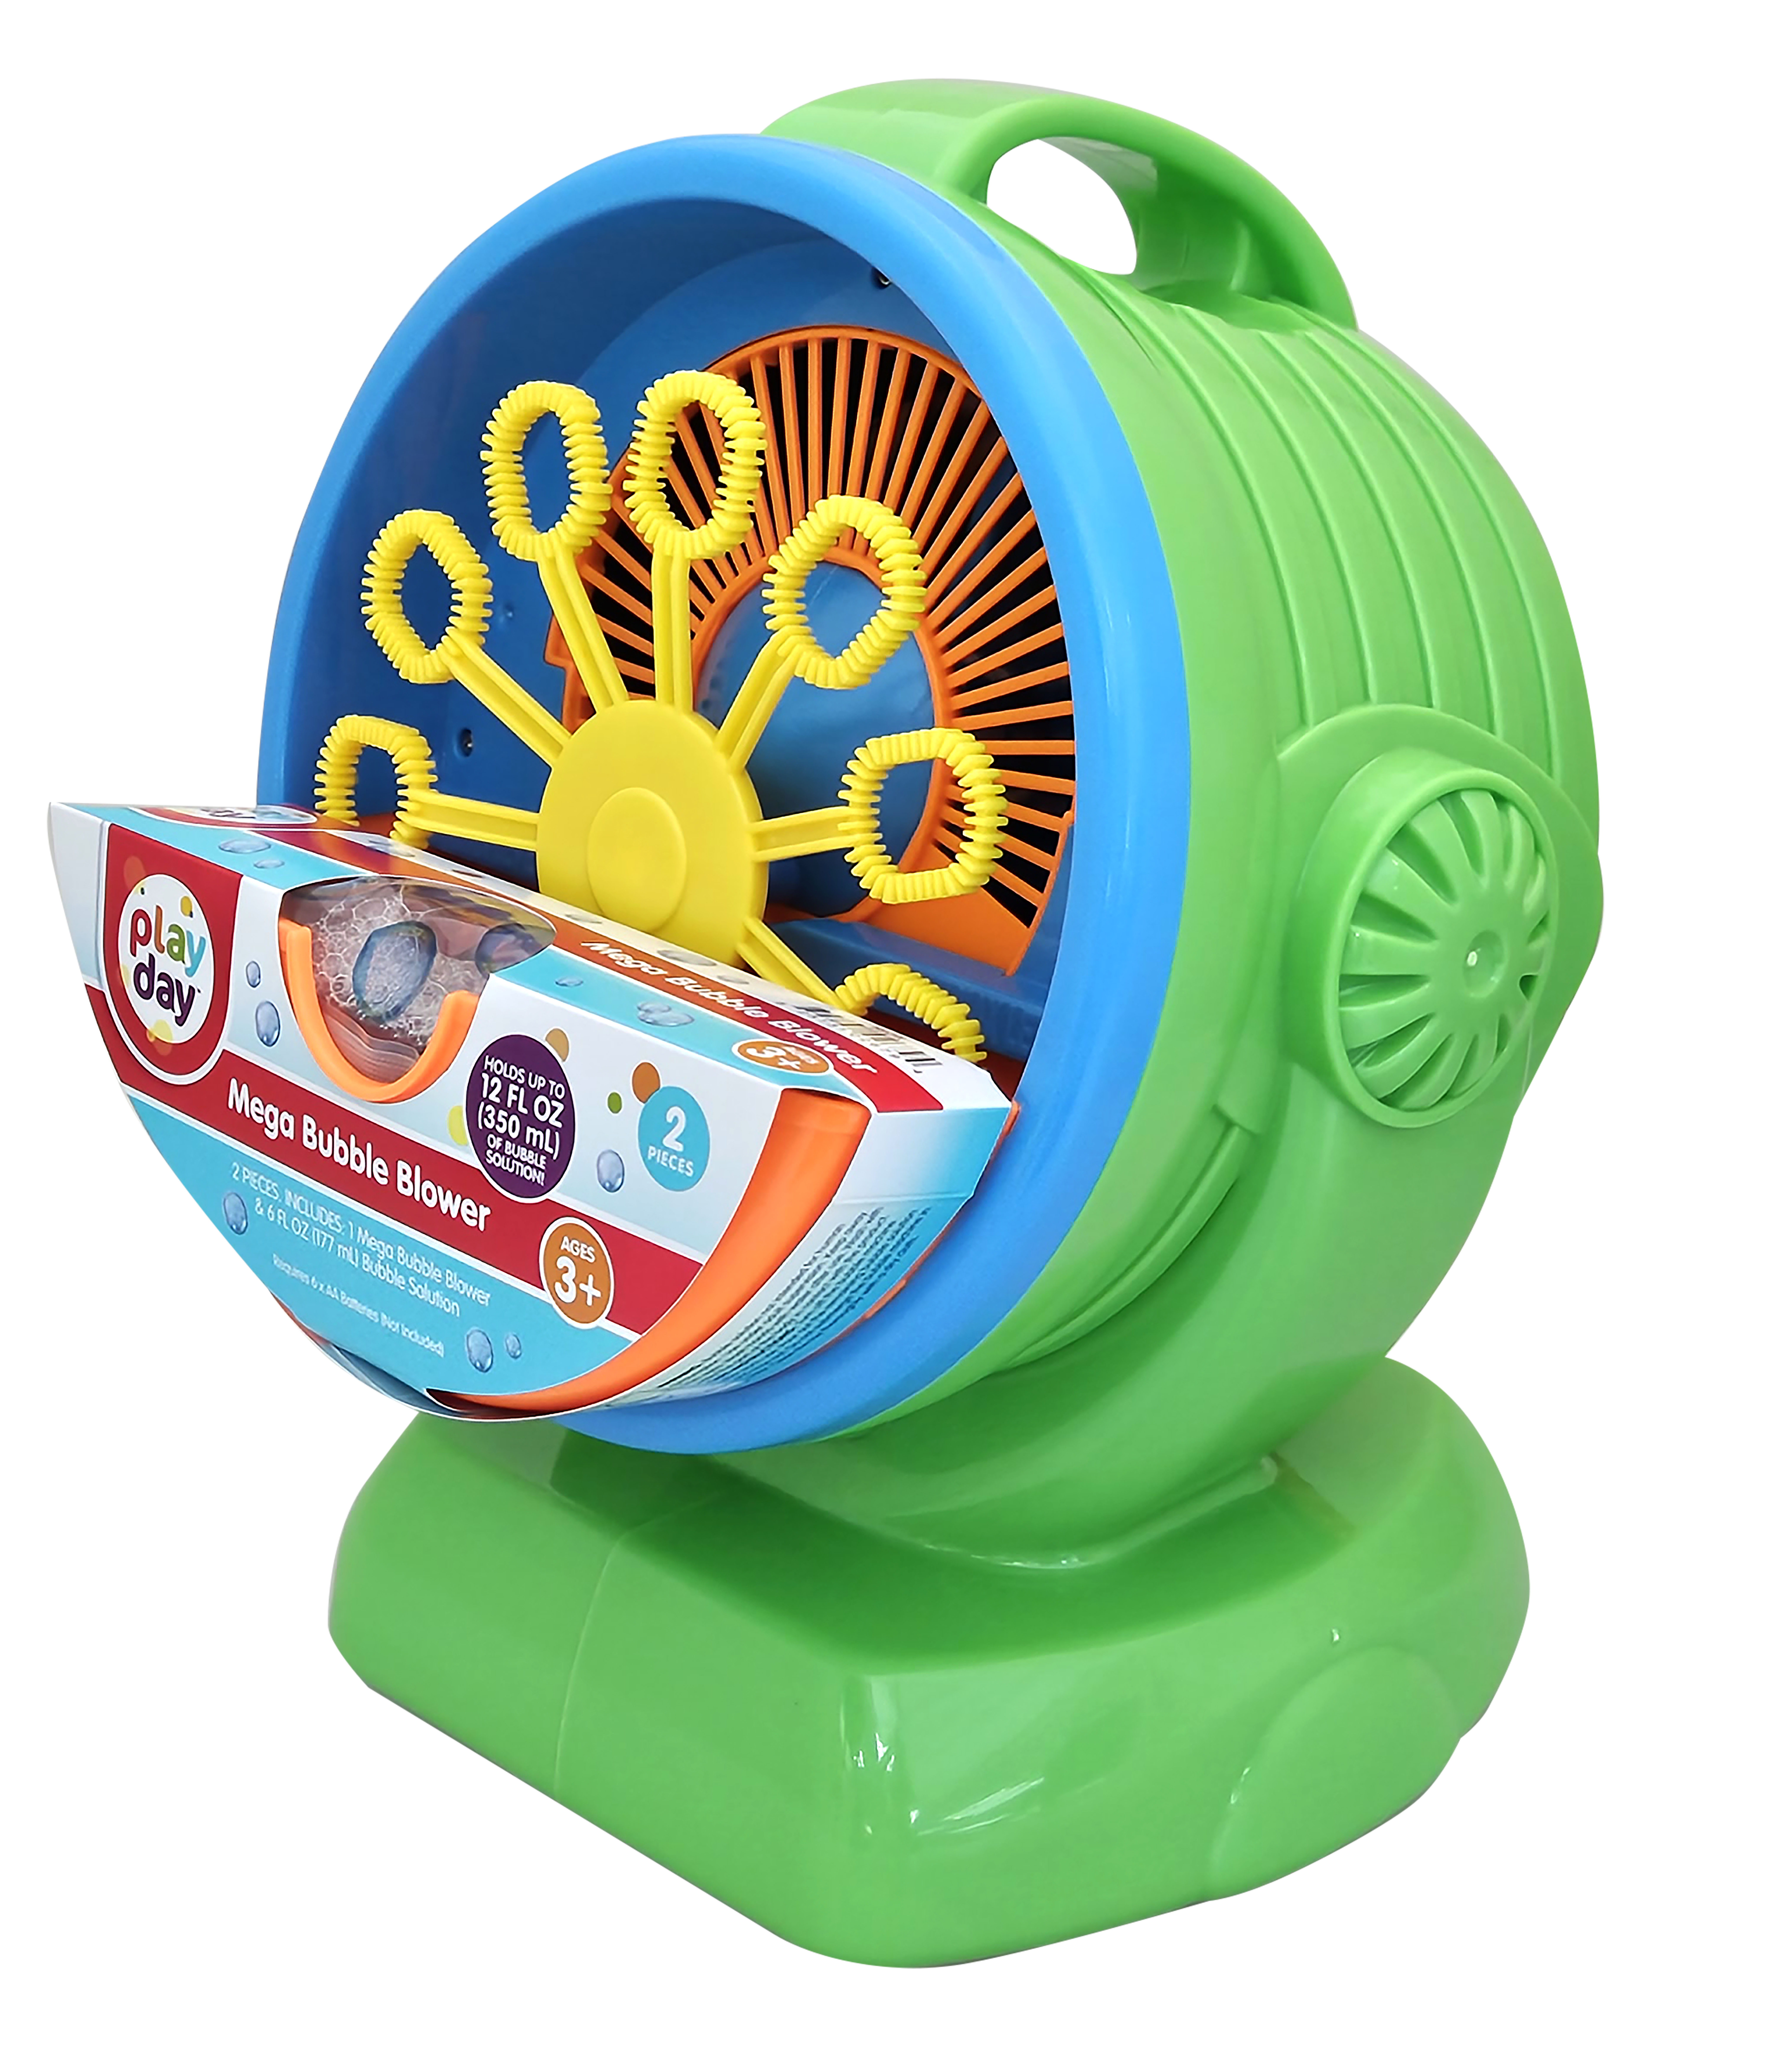 Play Day Mega Bubble Blower, Battery Operated, Bubble Blowing Toy Machine - image 3 of 7